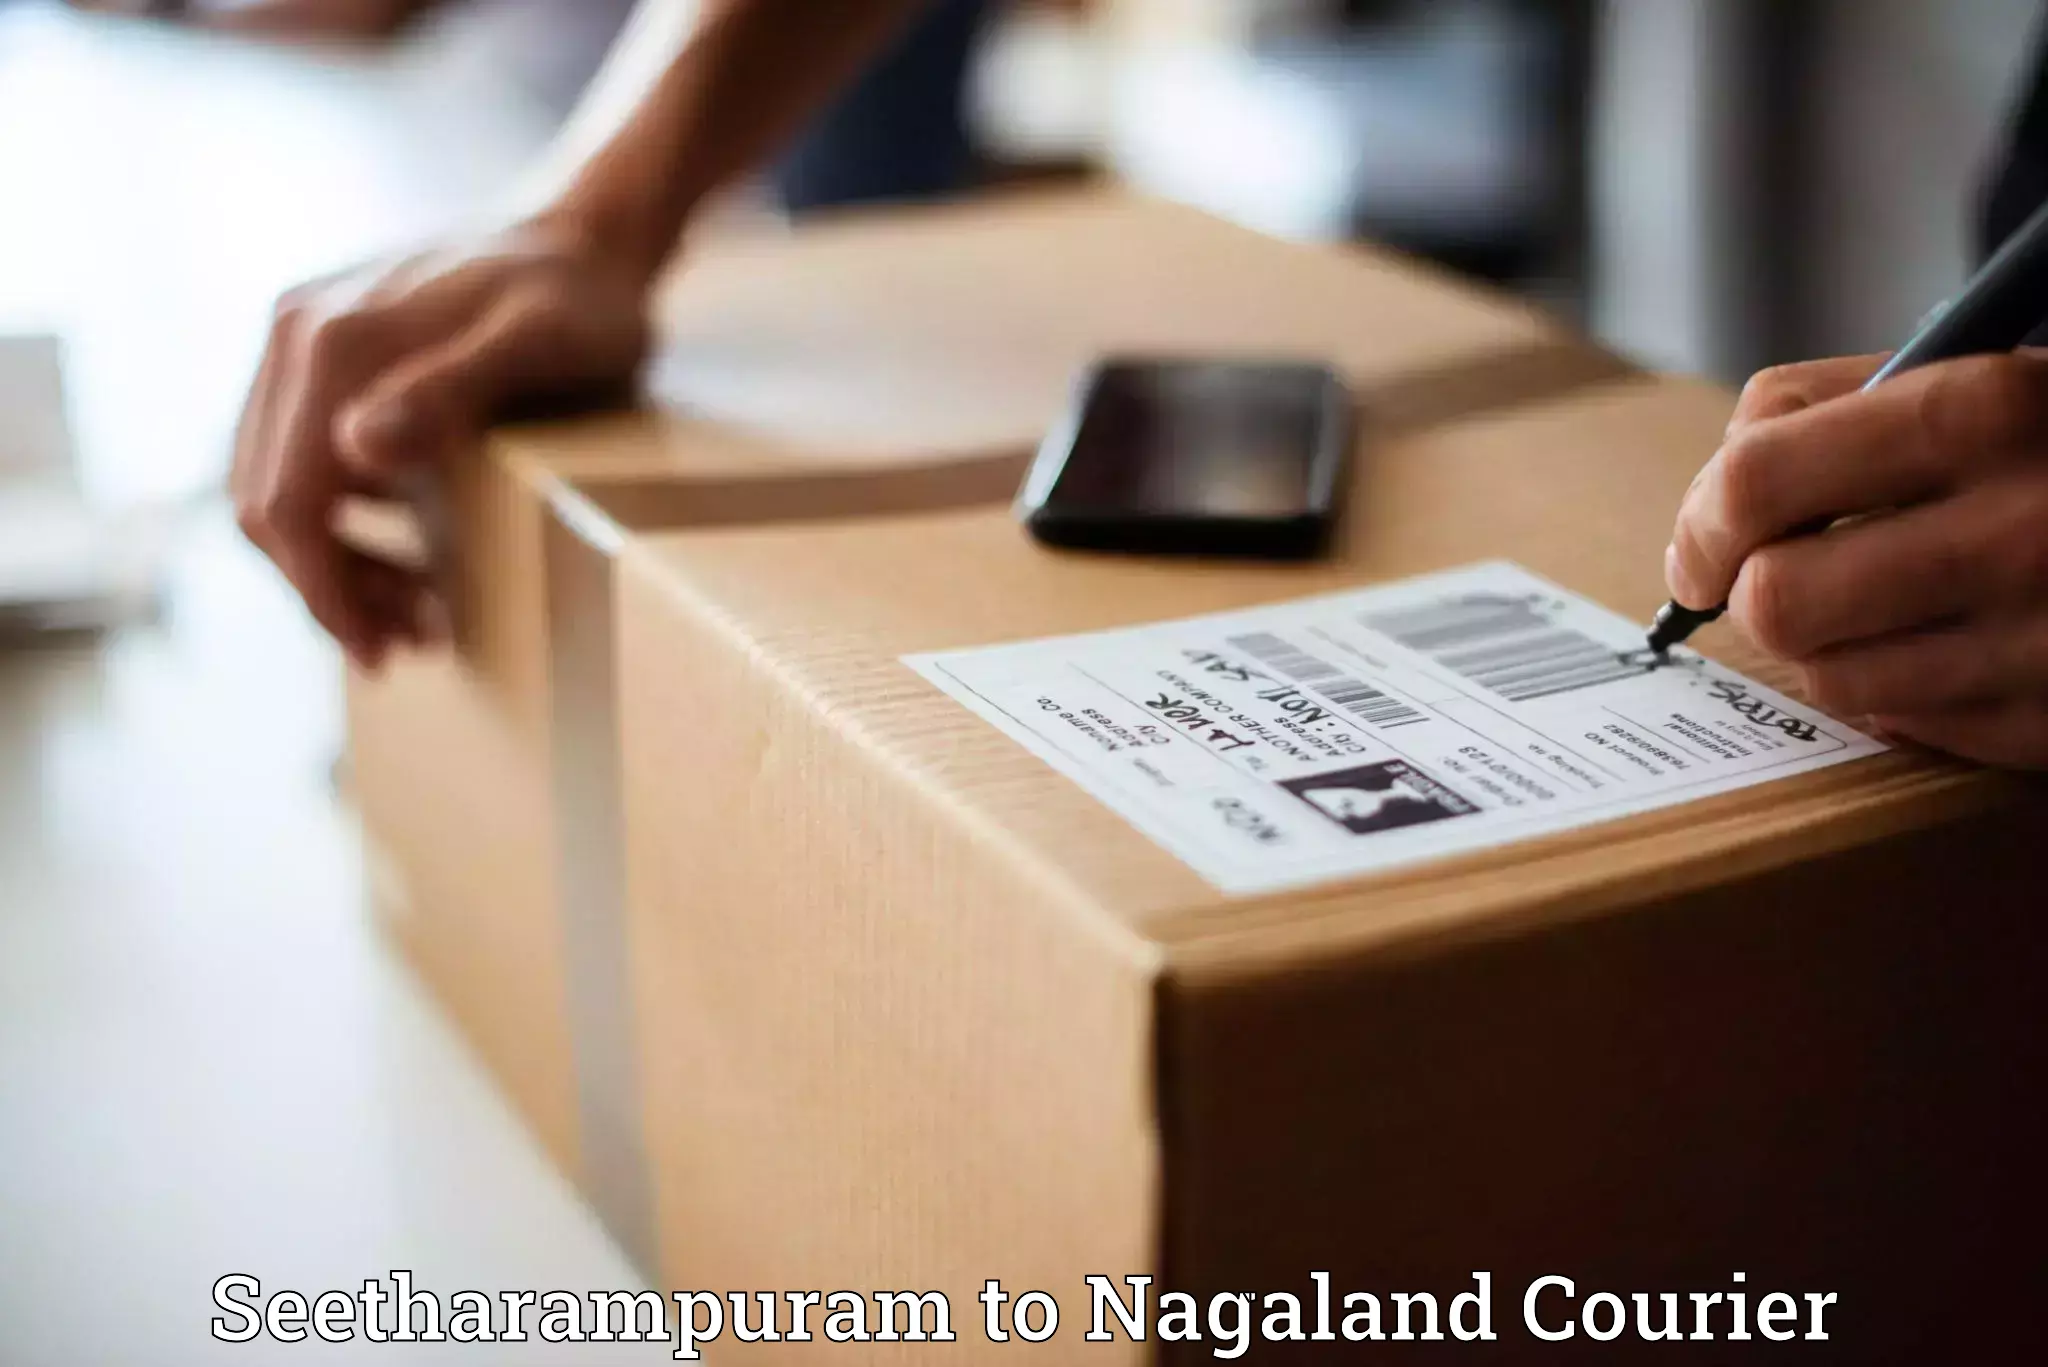 User-friendly delivery service Seetharampuram to Tuensang